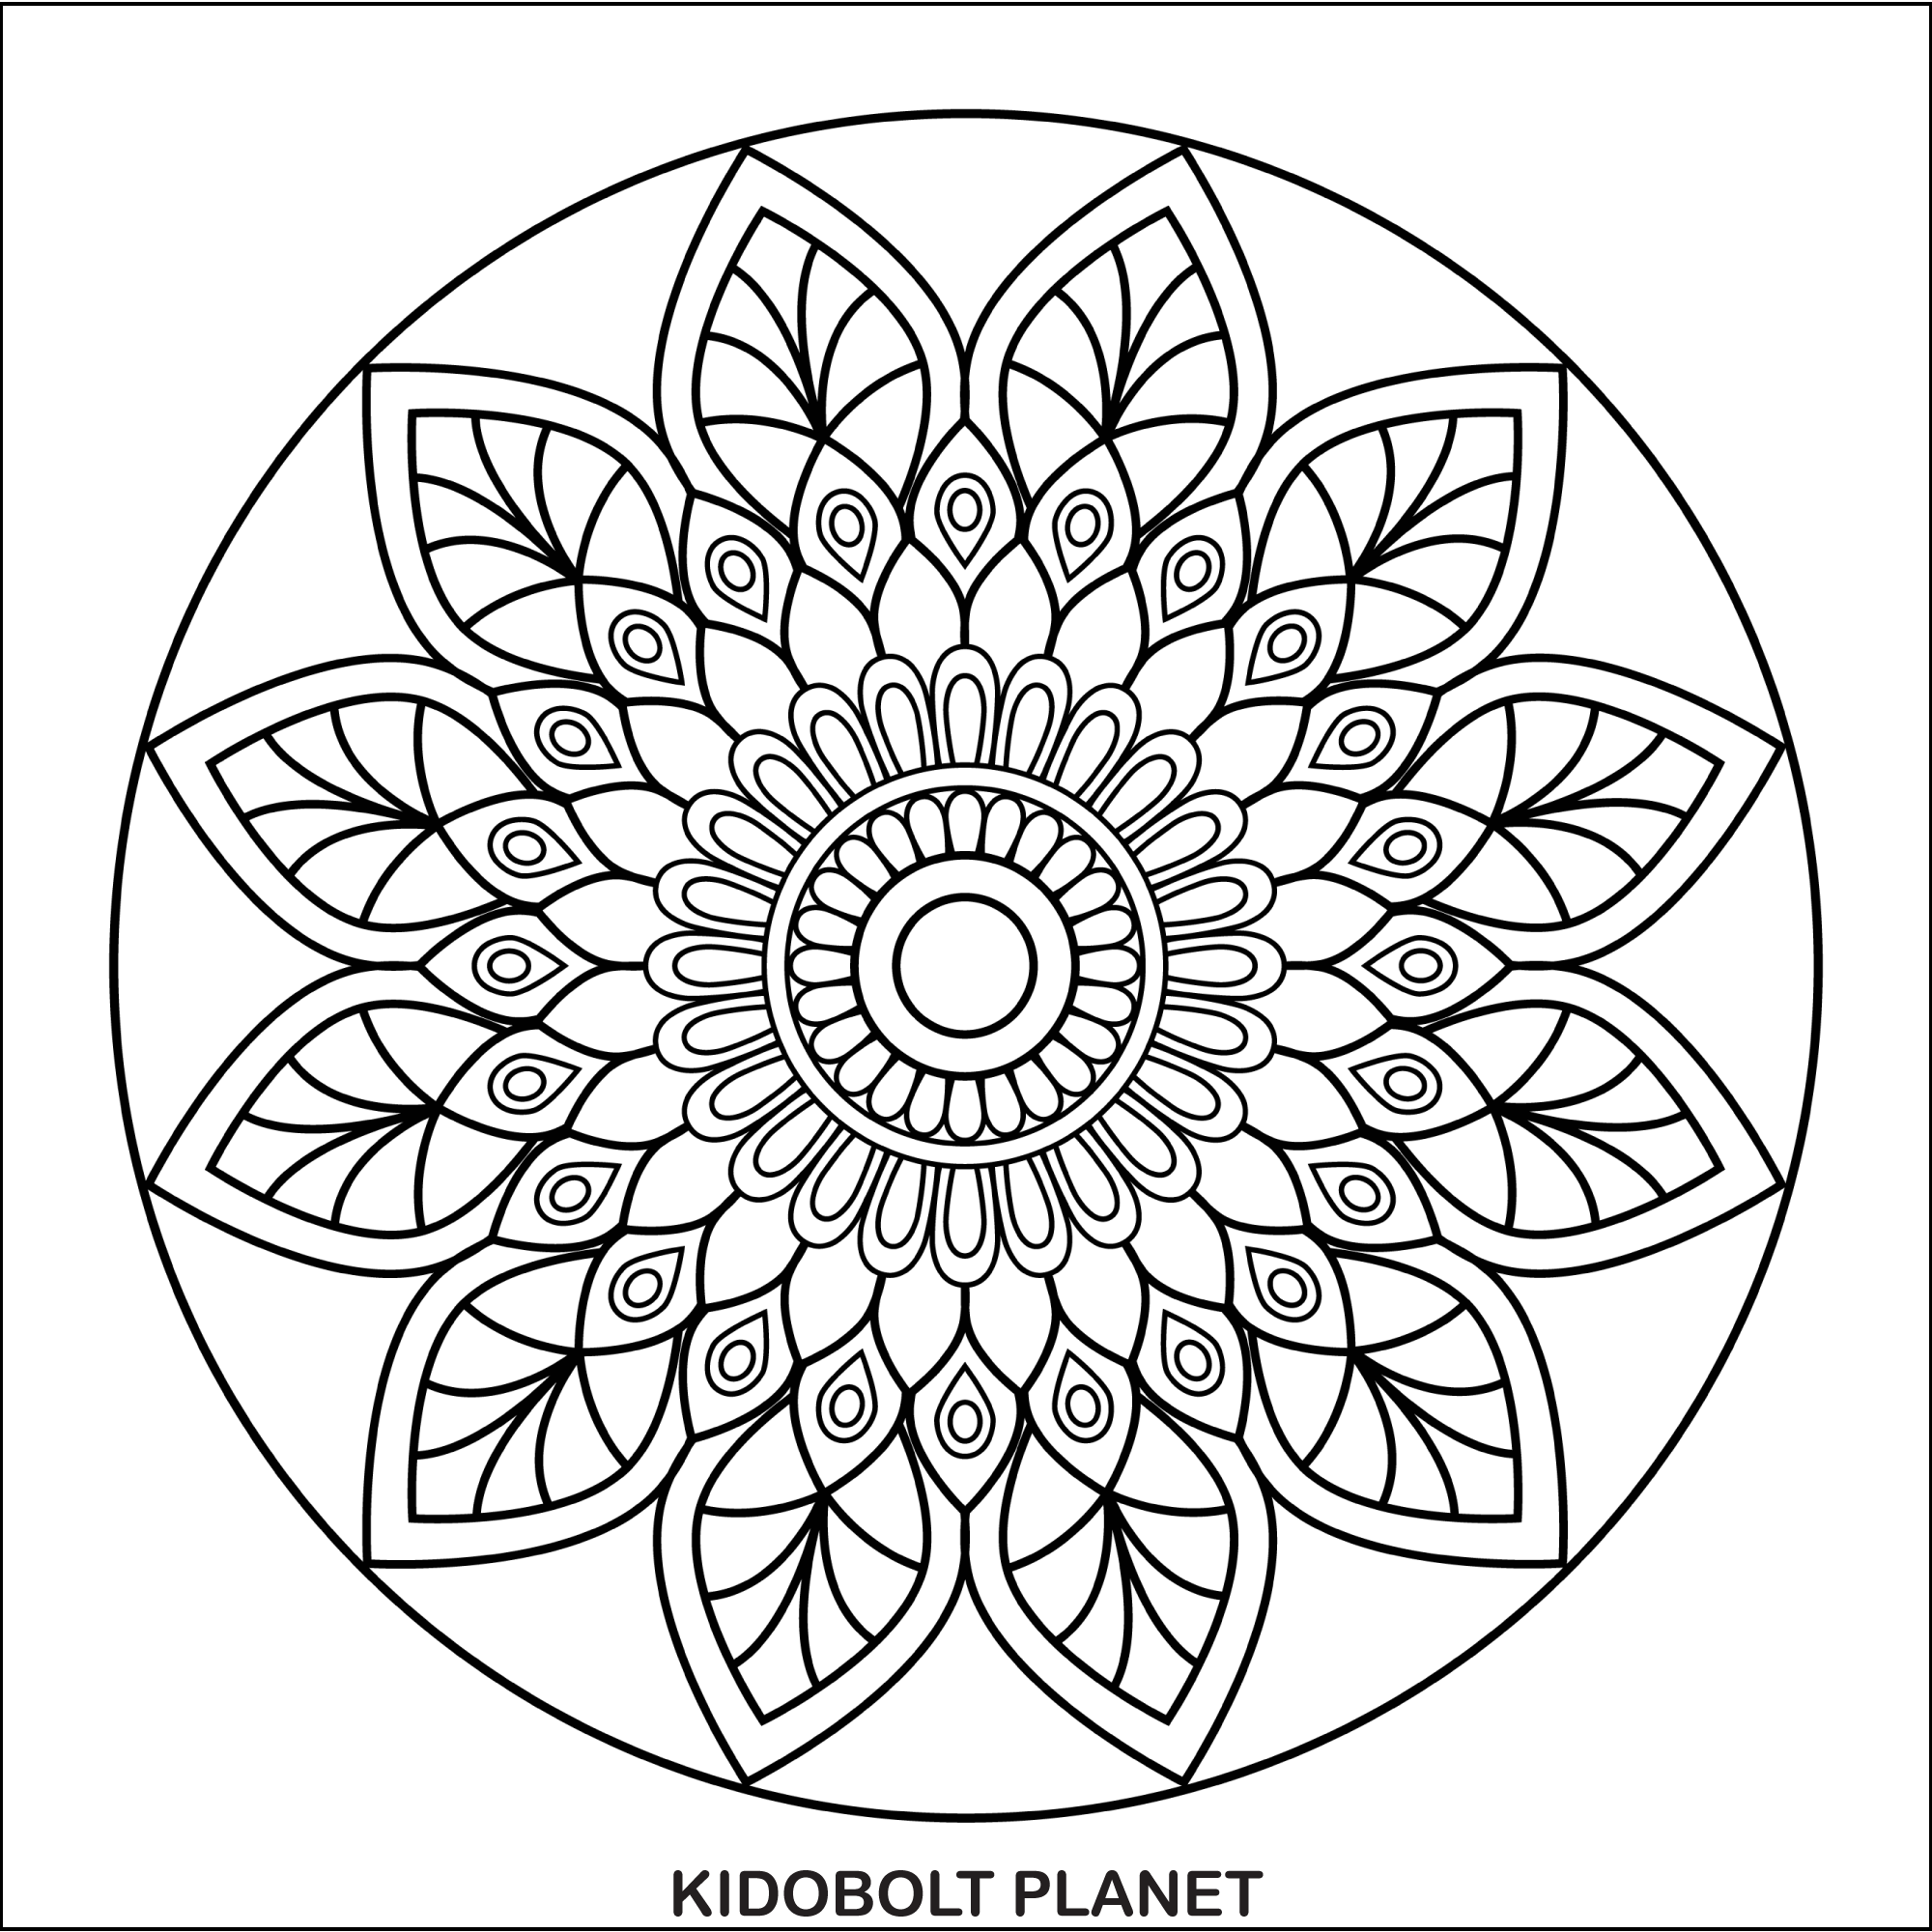 Mandala relaxing floral art activity printable made by teachers